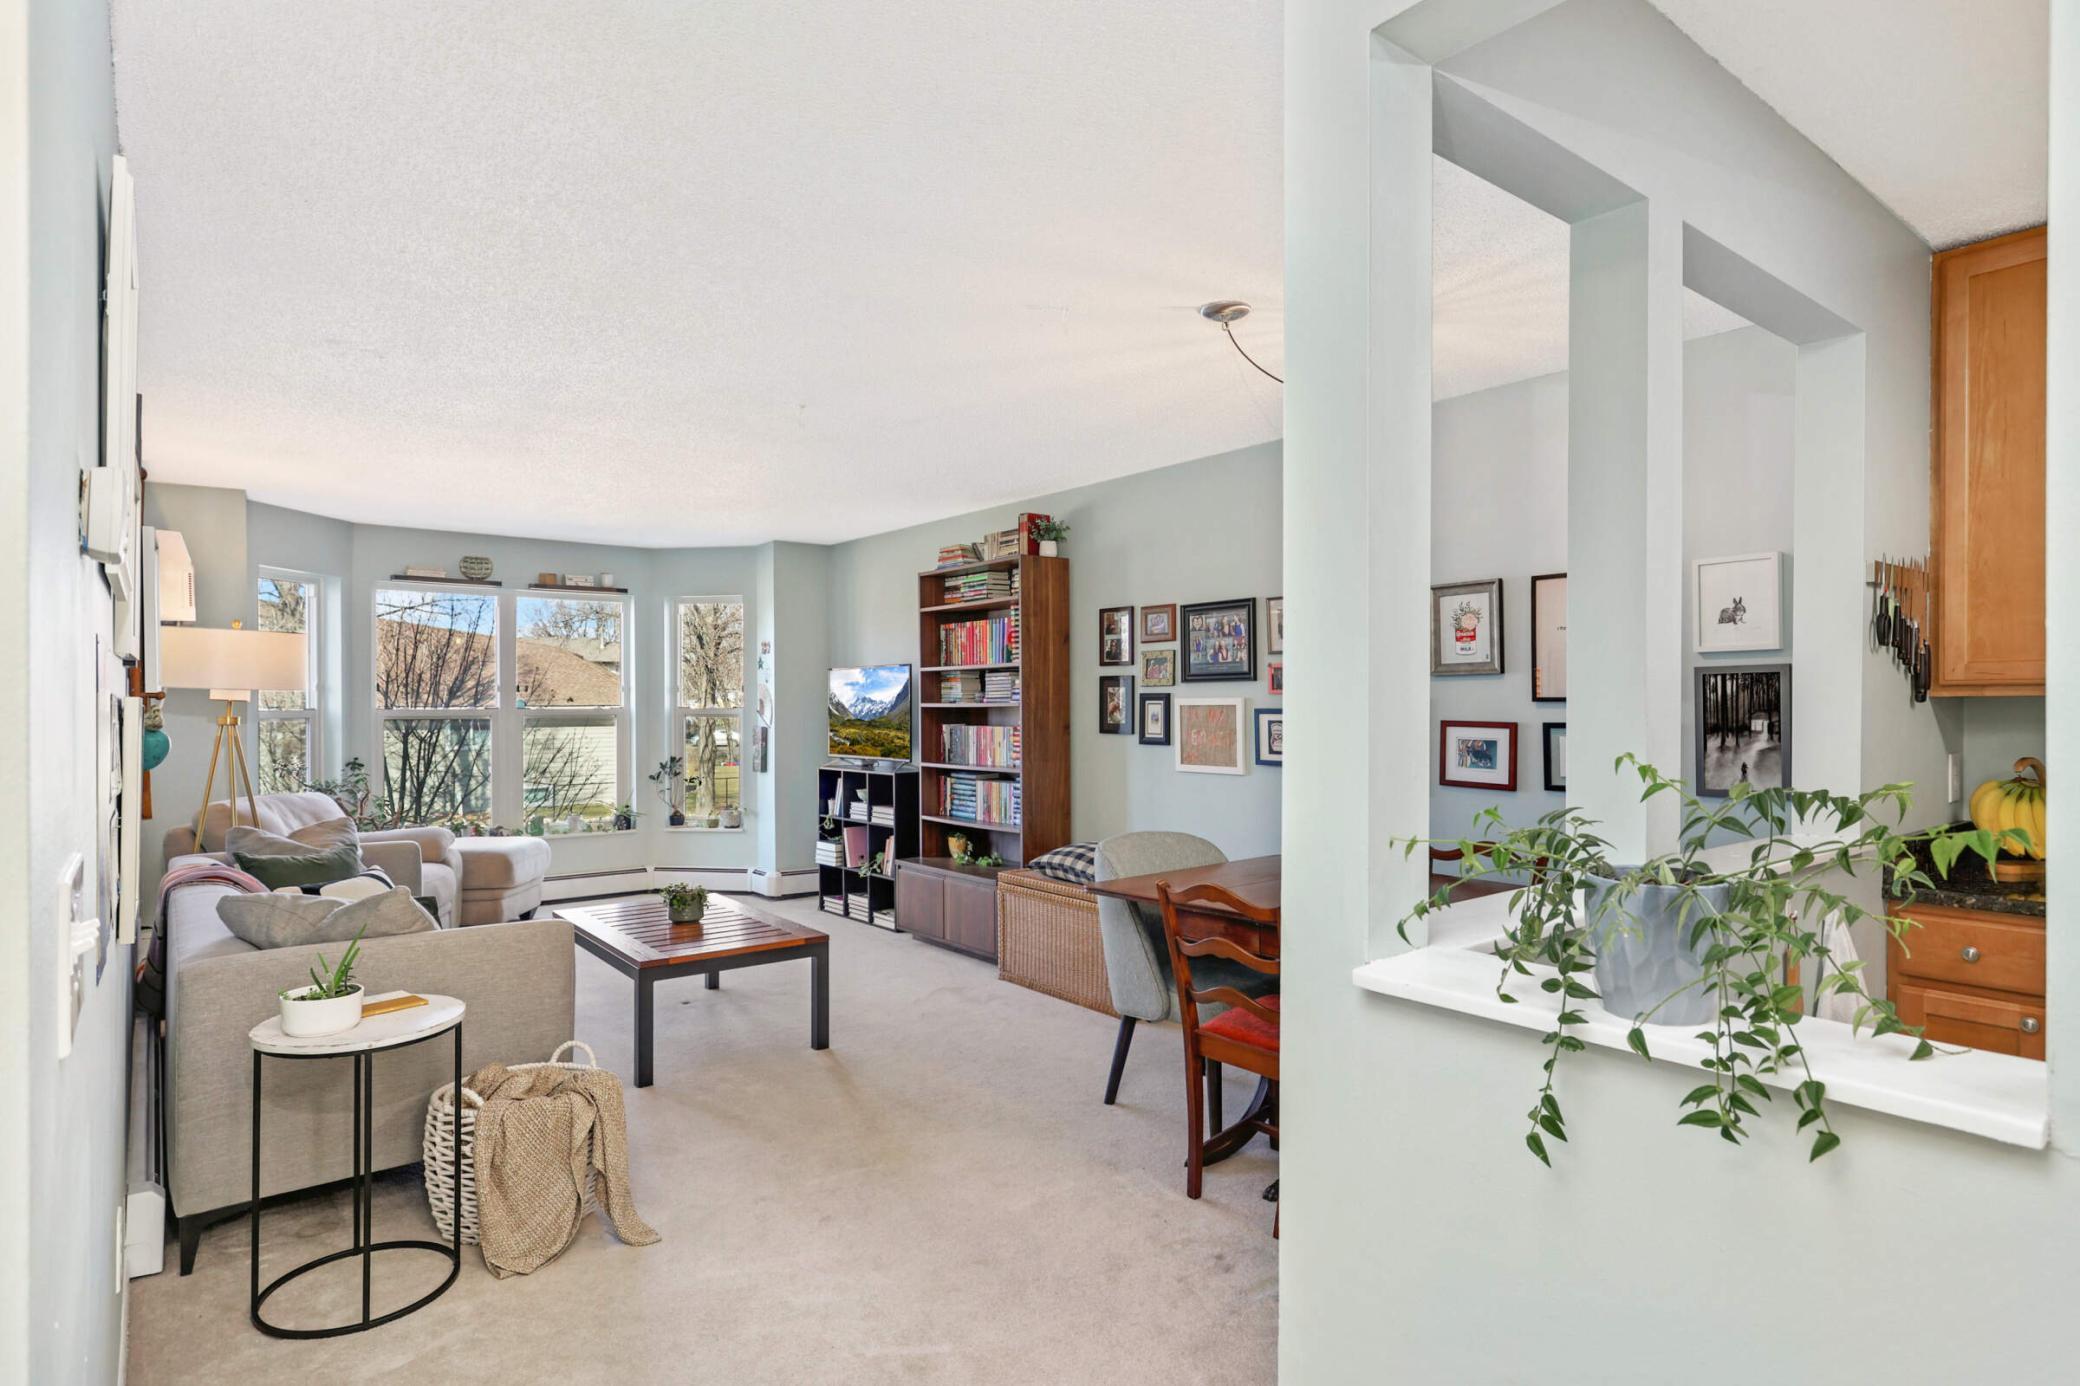 Welcome home to this inviting, spacious & private condo beaming with natural sunlight